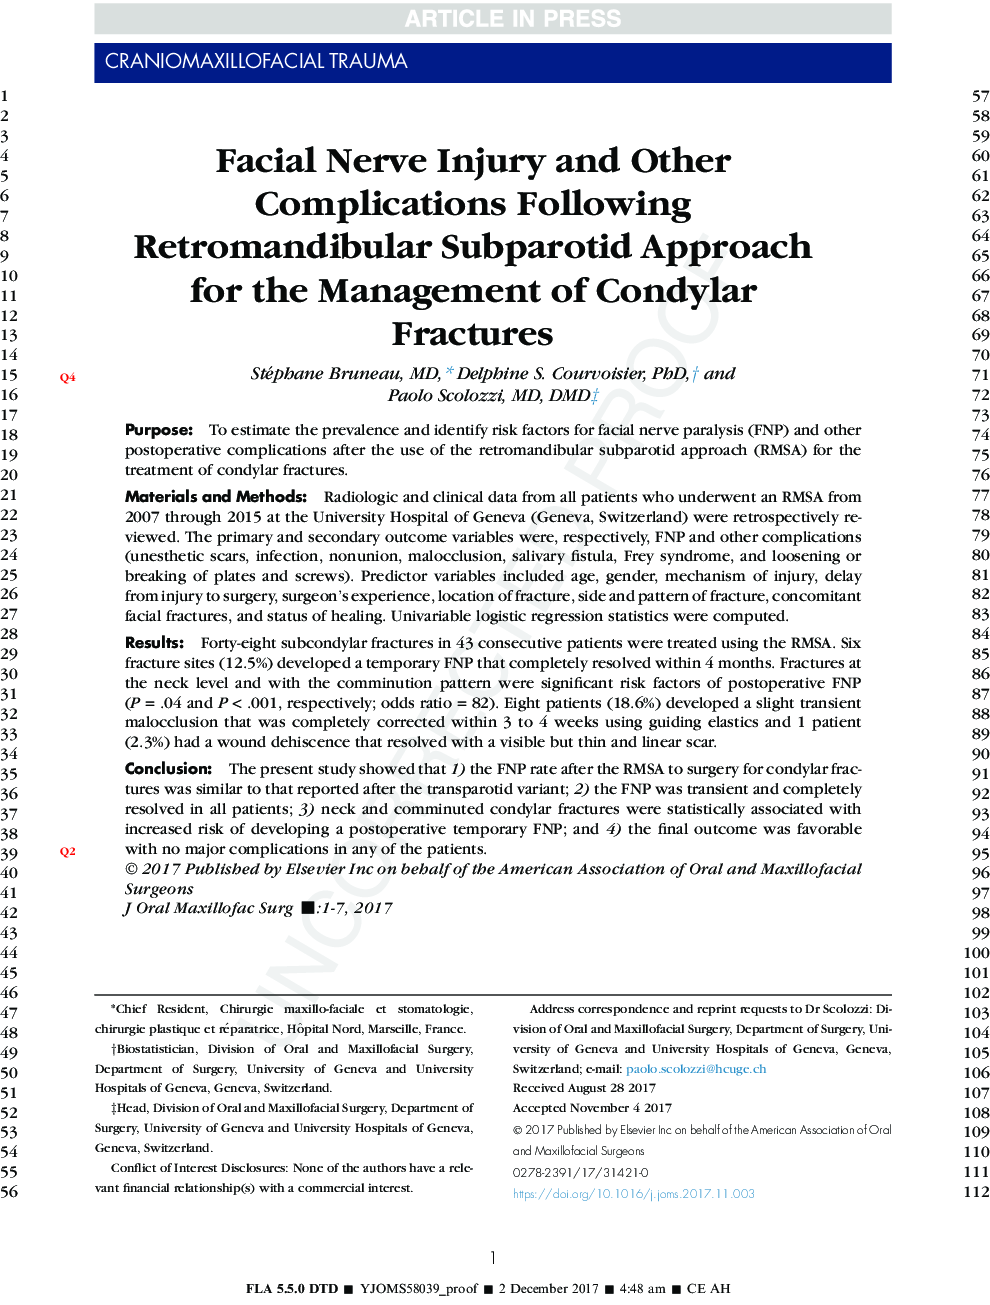 Facial Nerve Injury and Other Complications Following Retromandibular Subparotid Approach for the Management of Condylar Fractures